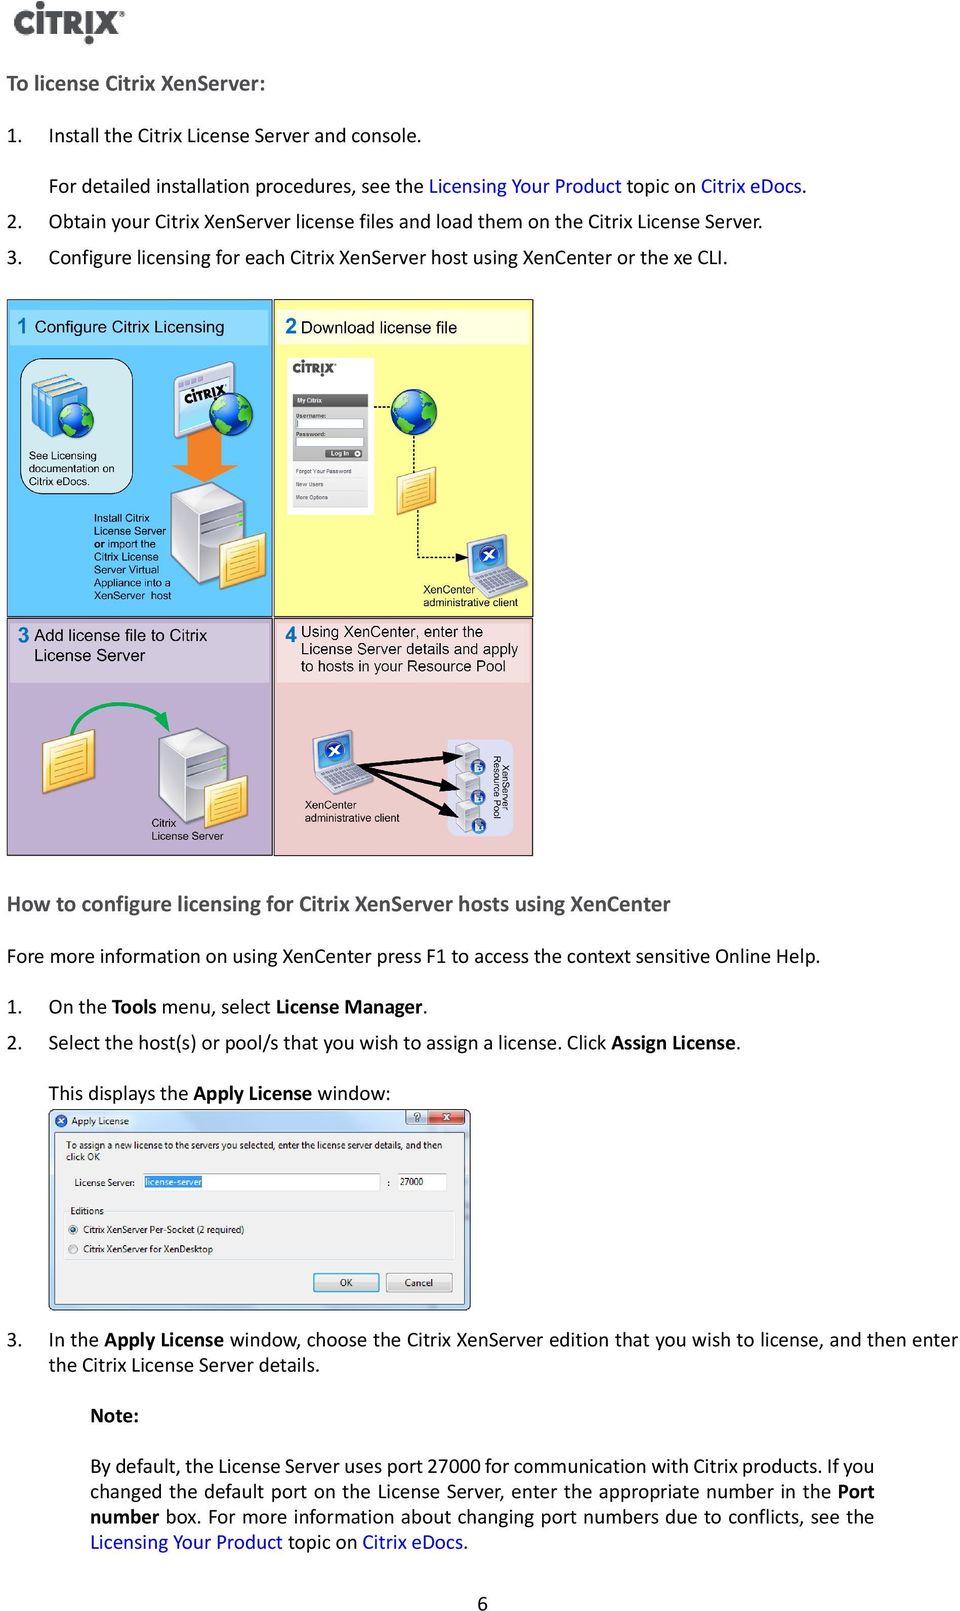 How to configure licensing for Citrix XenServer hosts using XenCenter Fore more information on using XenCenter press F1 to access the context sensitive Online Help.